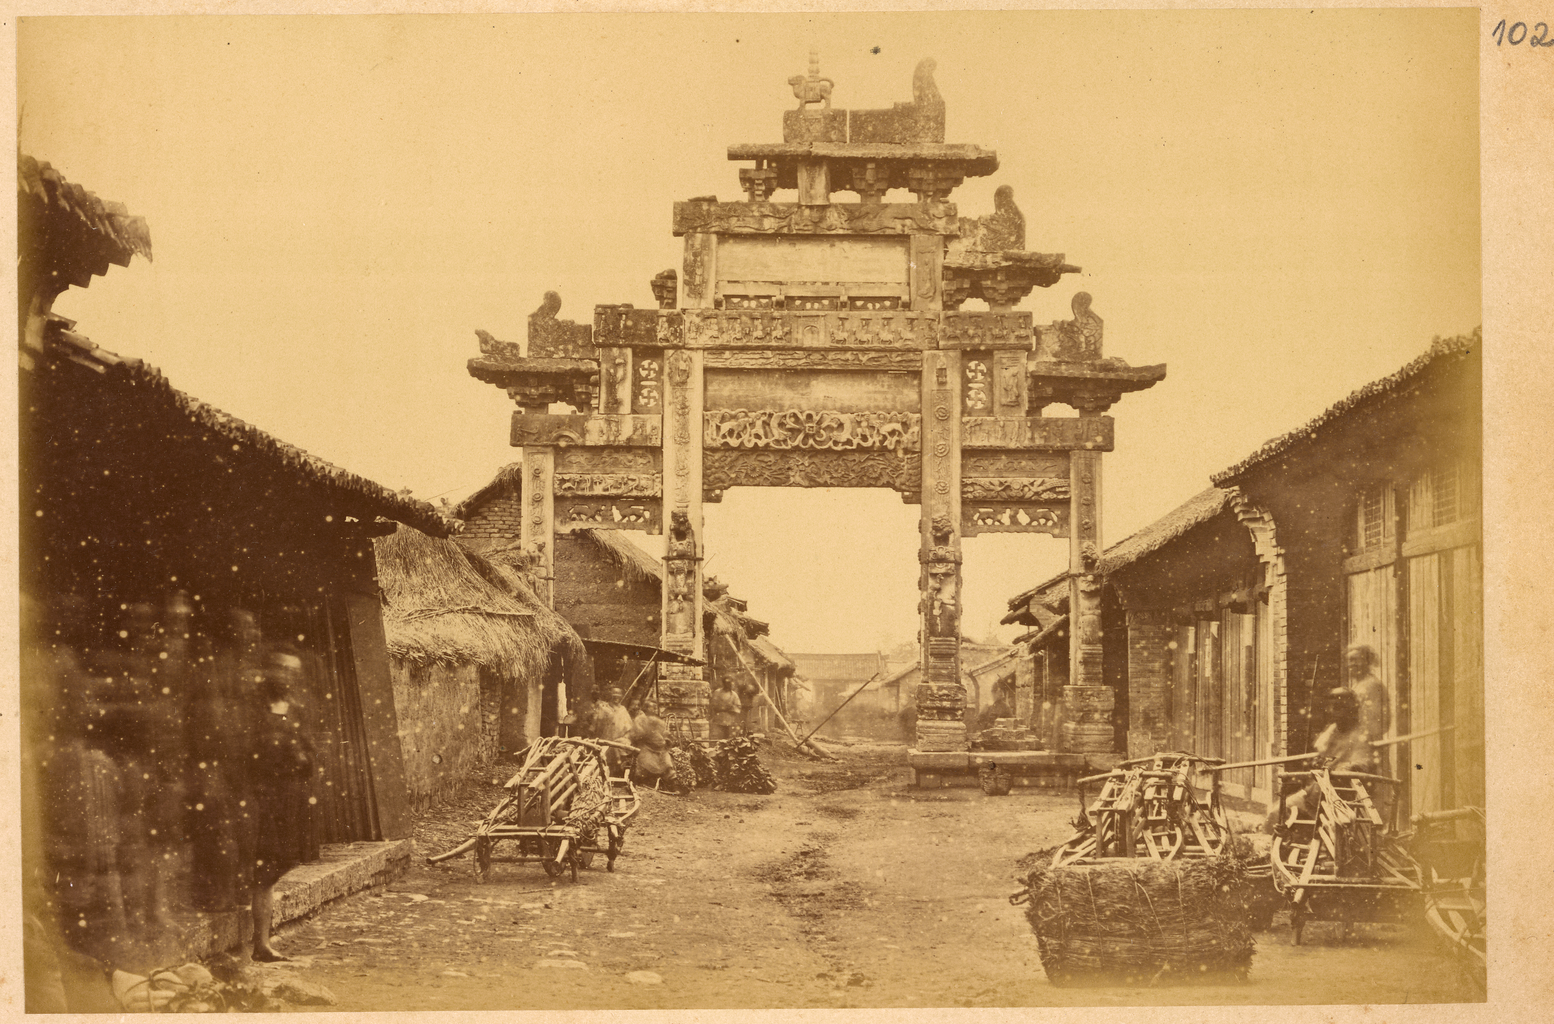 27 Ornamental Gateway Pailou from Han Dynasty 202 BCE 220 CE across a Street Lined with Small Shops Hanzhong Shaanxi Province China 1875 WDL2092